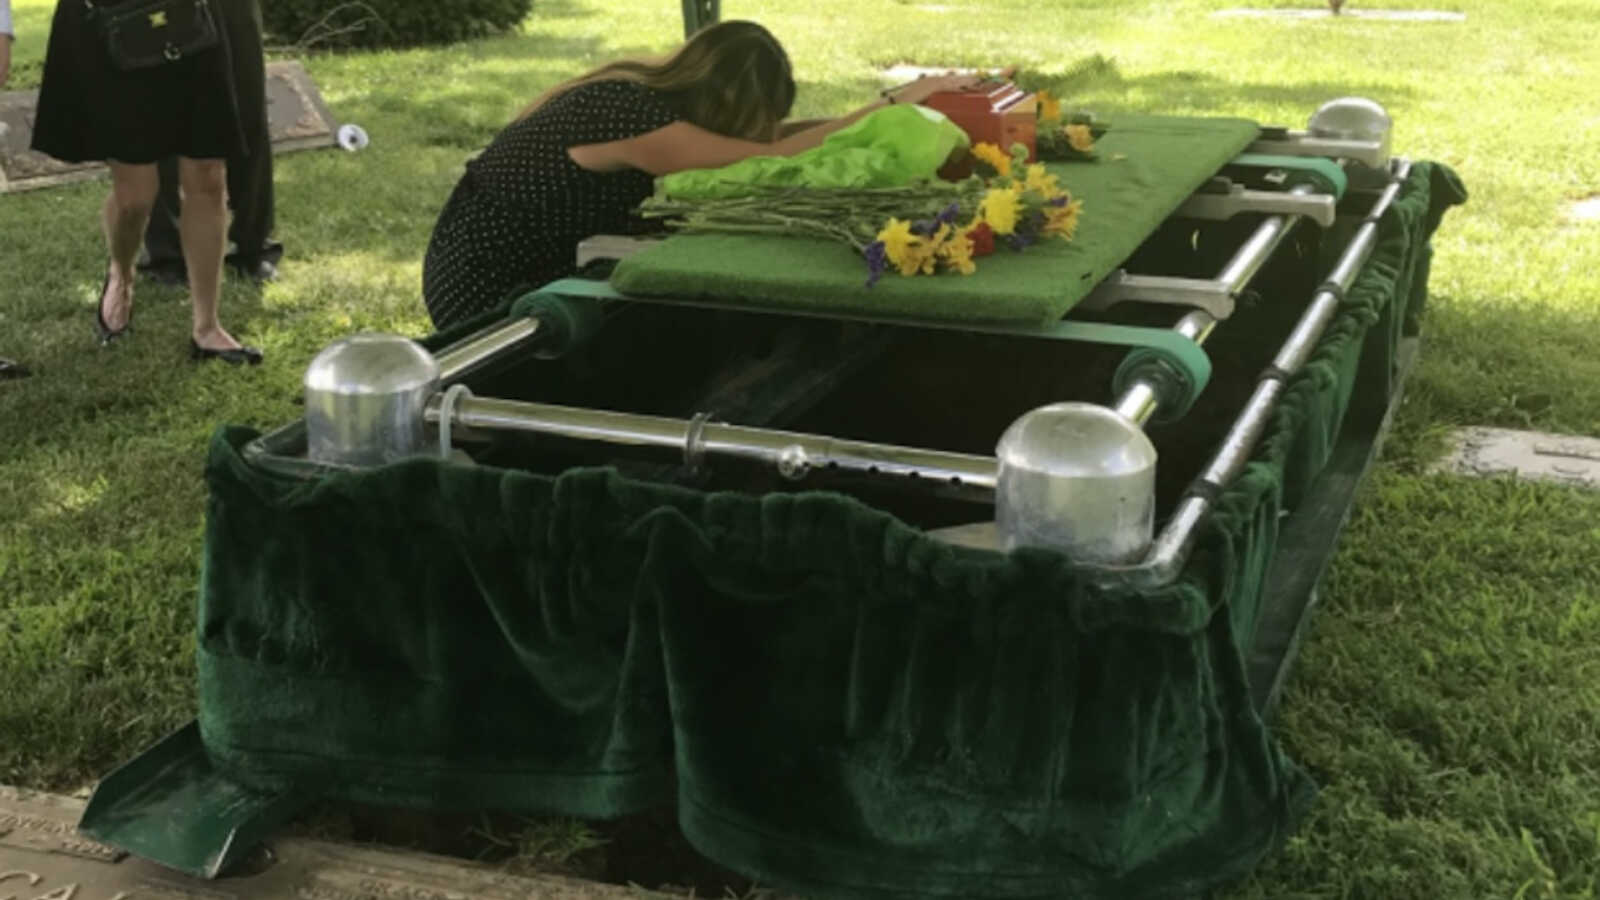 Widow grieves at funeral for husband who died of alcoholism.